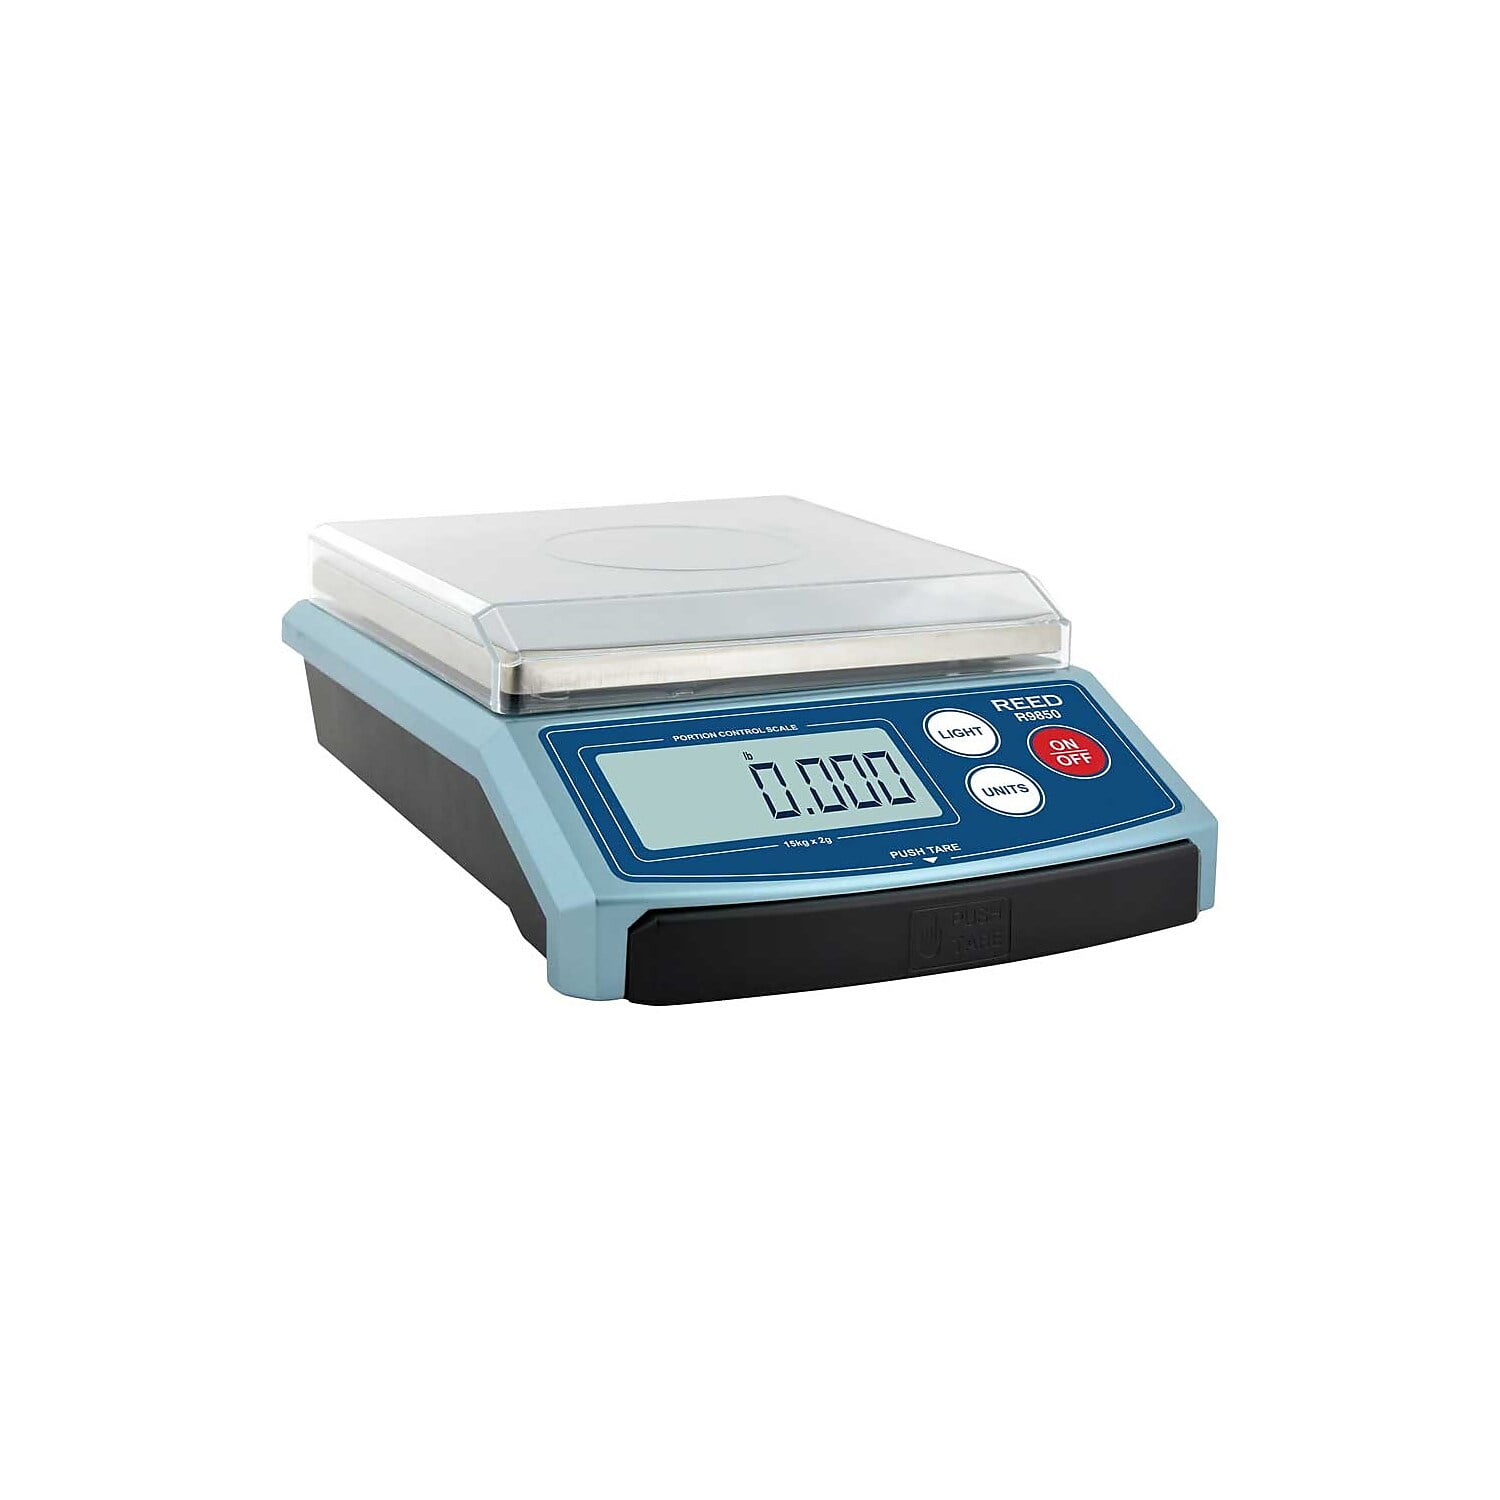 Taylor Digital Glass Scale with Motion and Light Sensors Gray 5283426